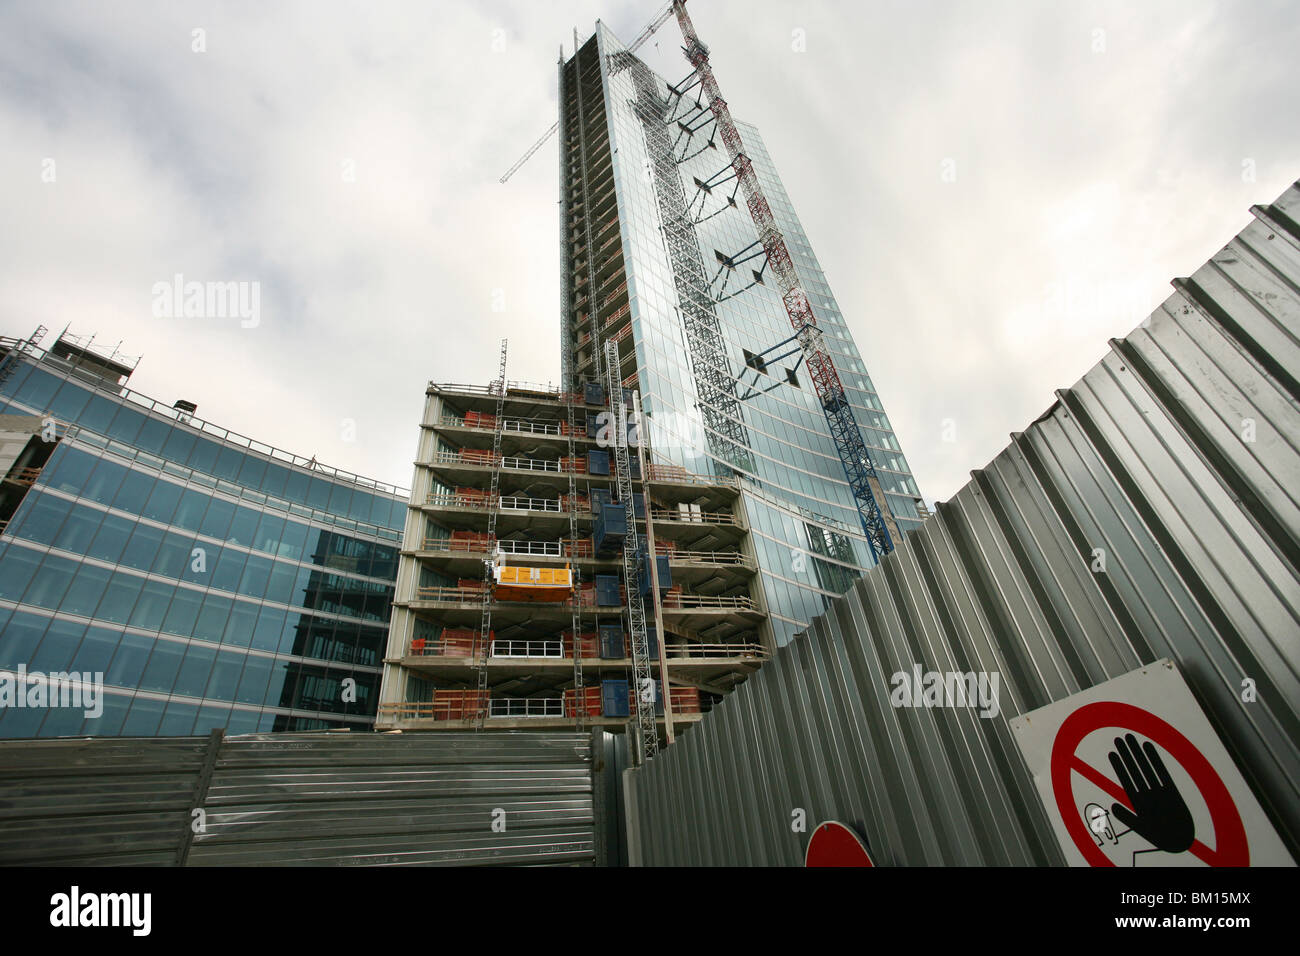 The new Palace of Regione Lombardia building site, Isola area, Milan ...